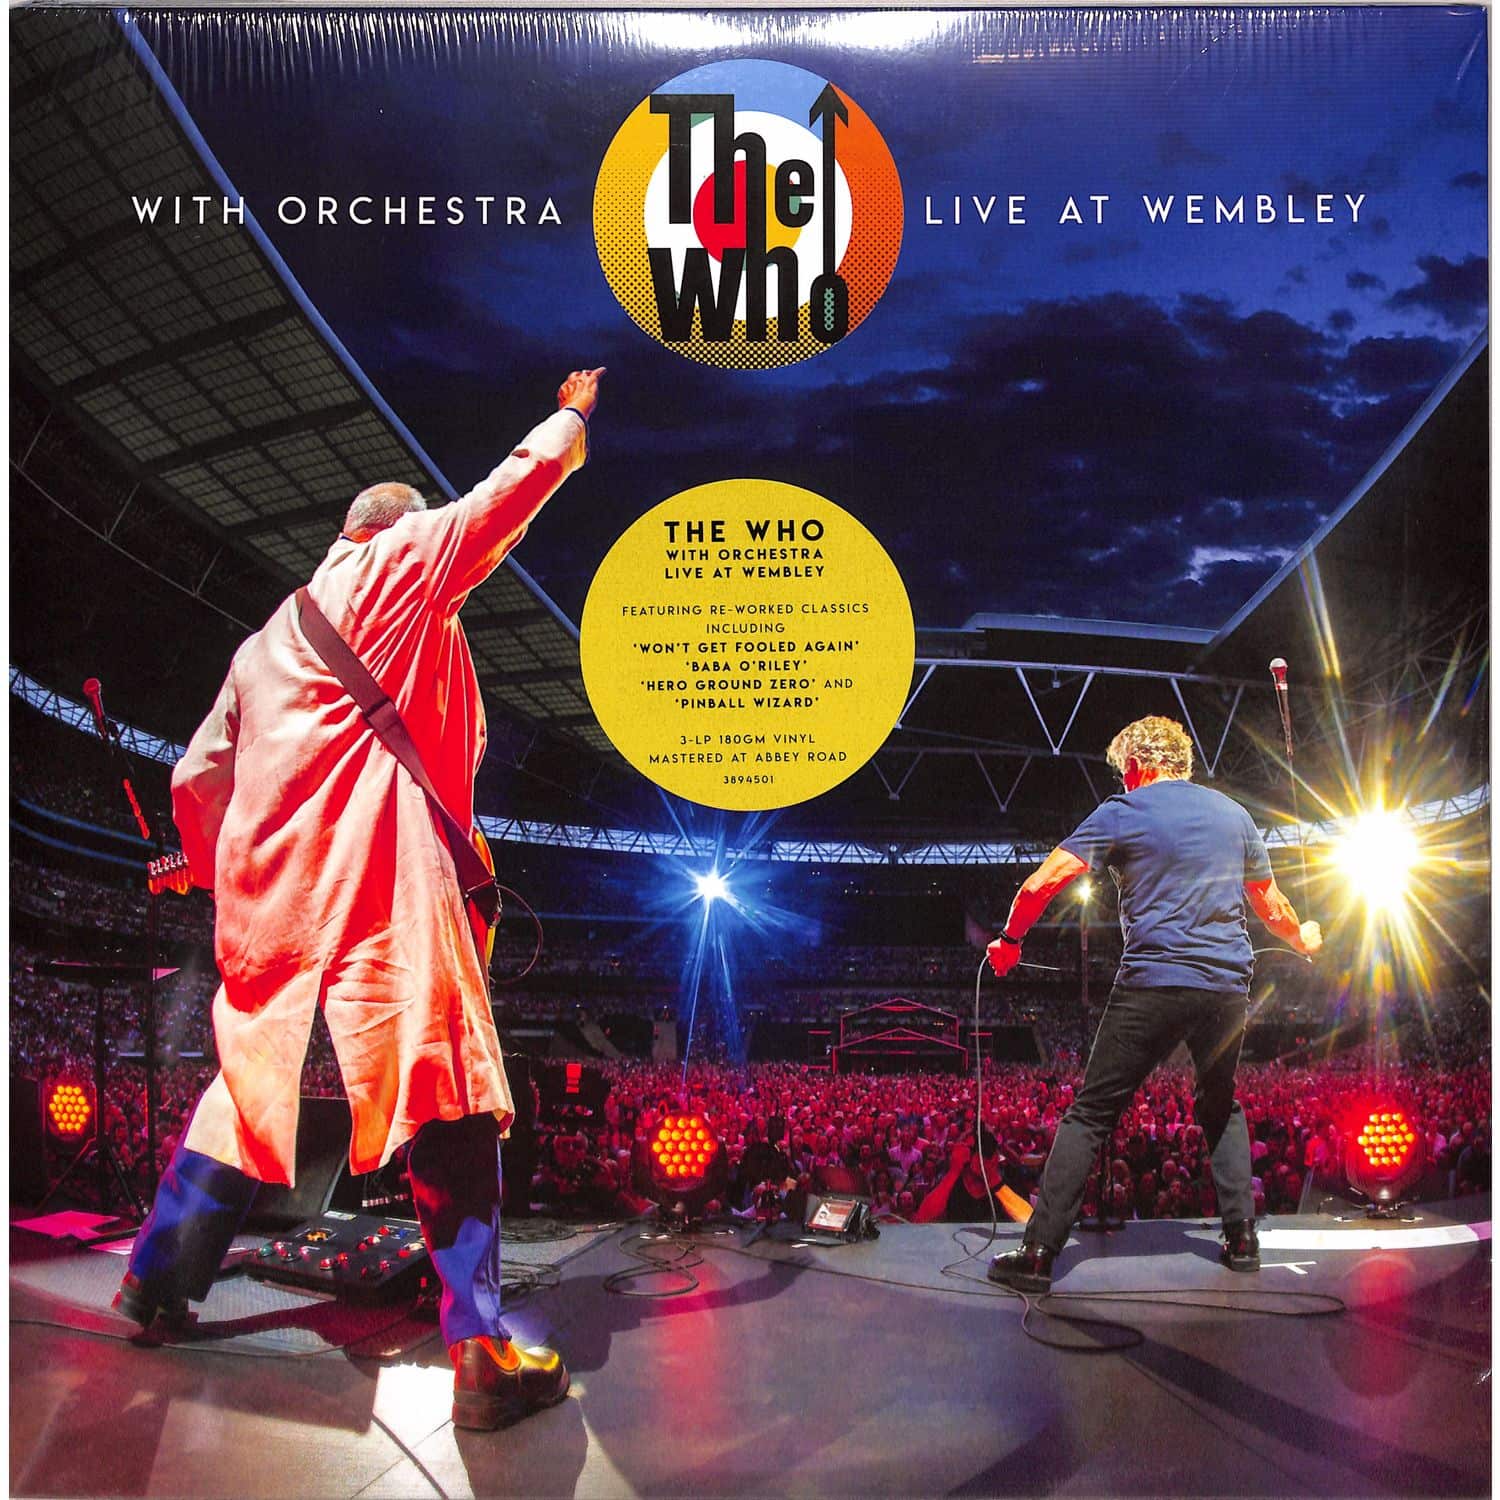 The Who & Isobel Griffiths Orchestra - THE WHO WITH ORCHESTRA: LIVE AT WEMBLEY 